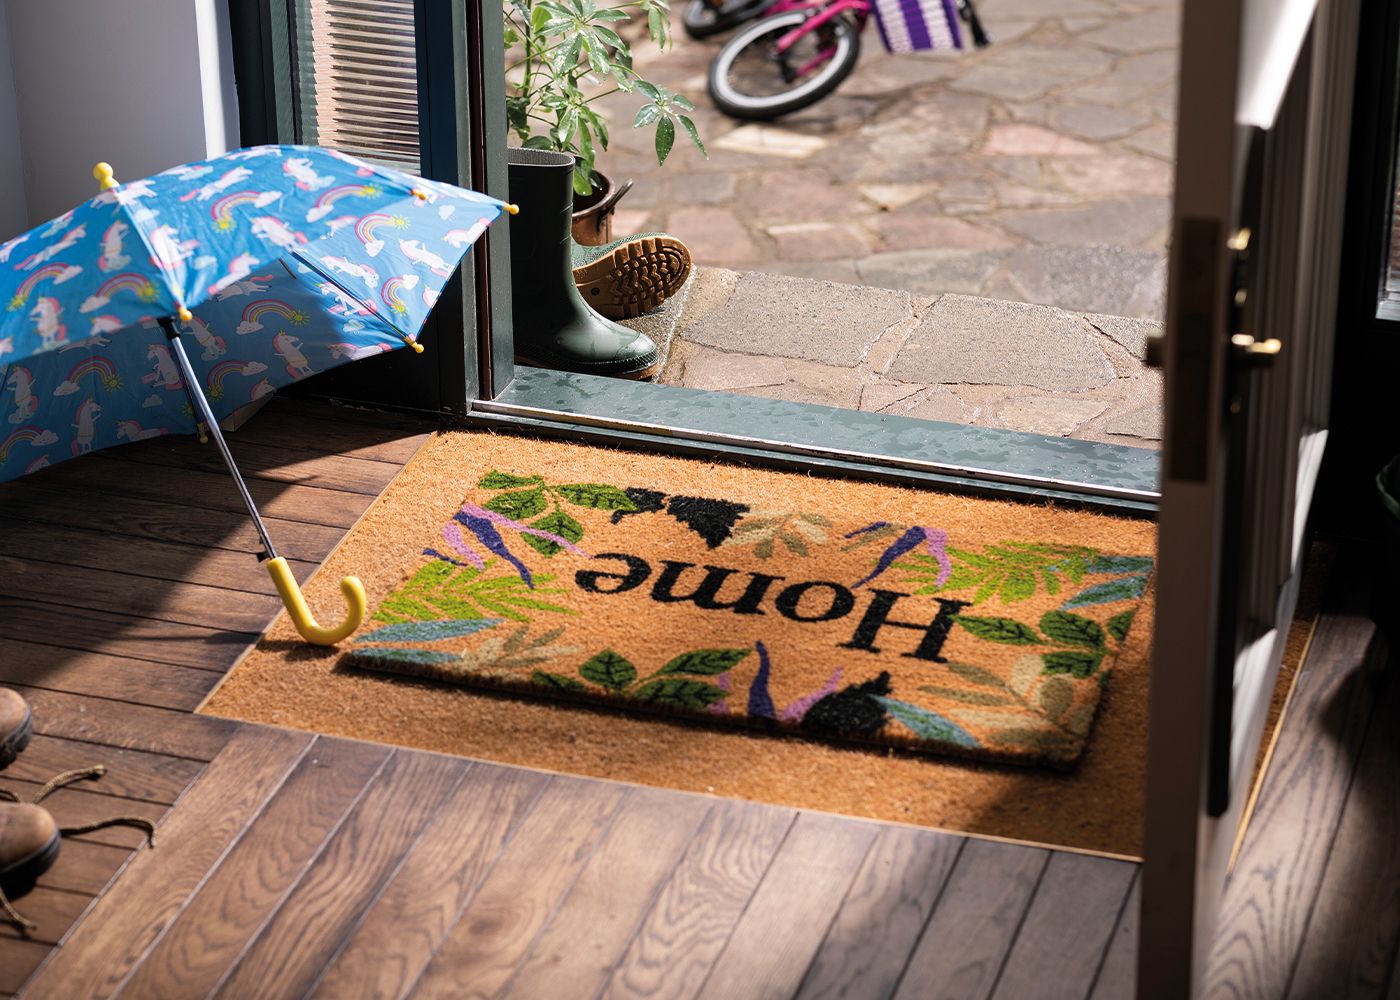 An umbrella is open indoors on a mat next to the front door of a house.